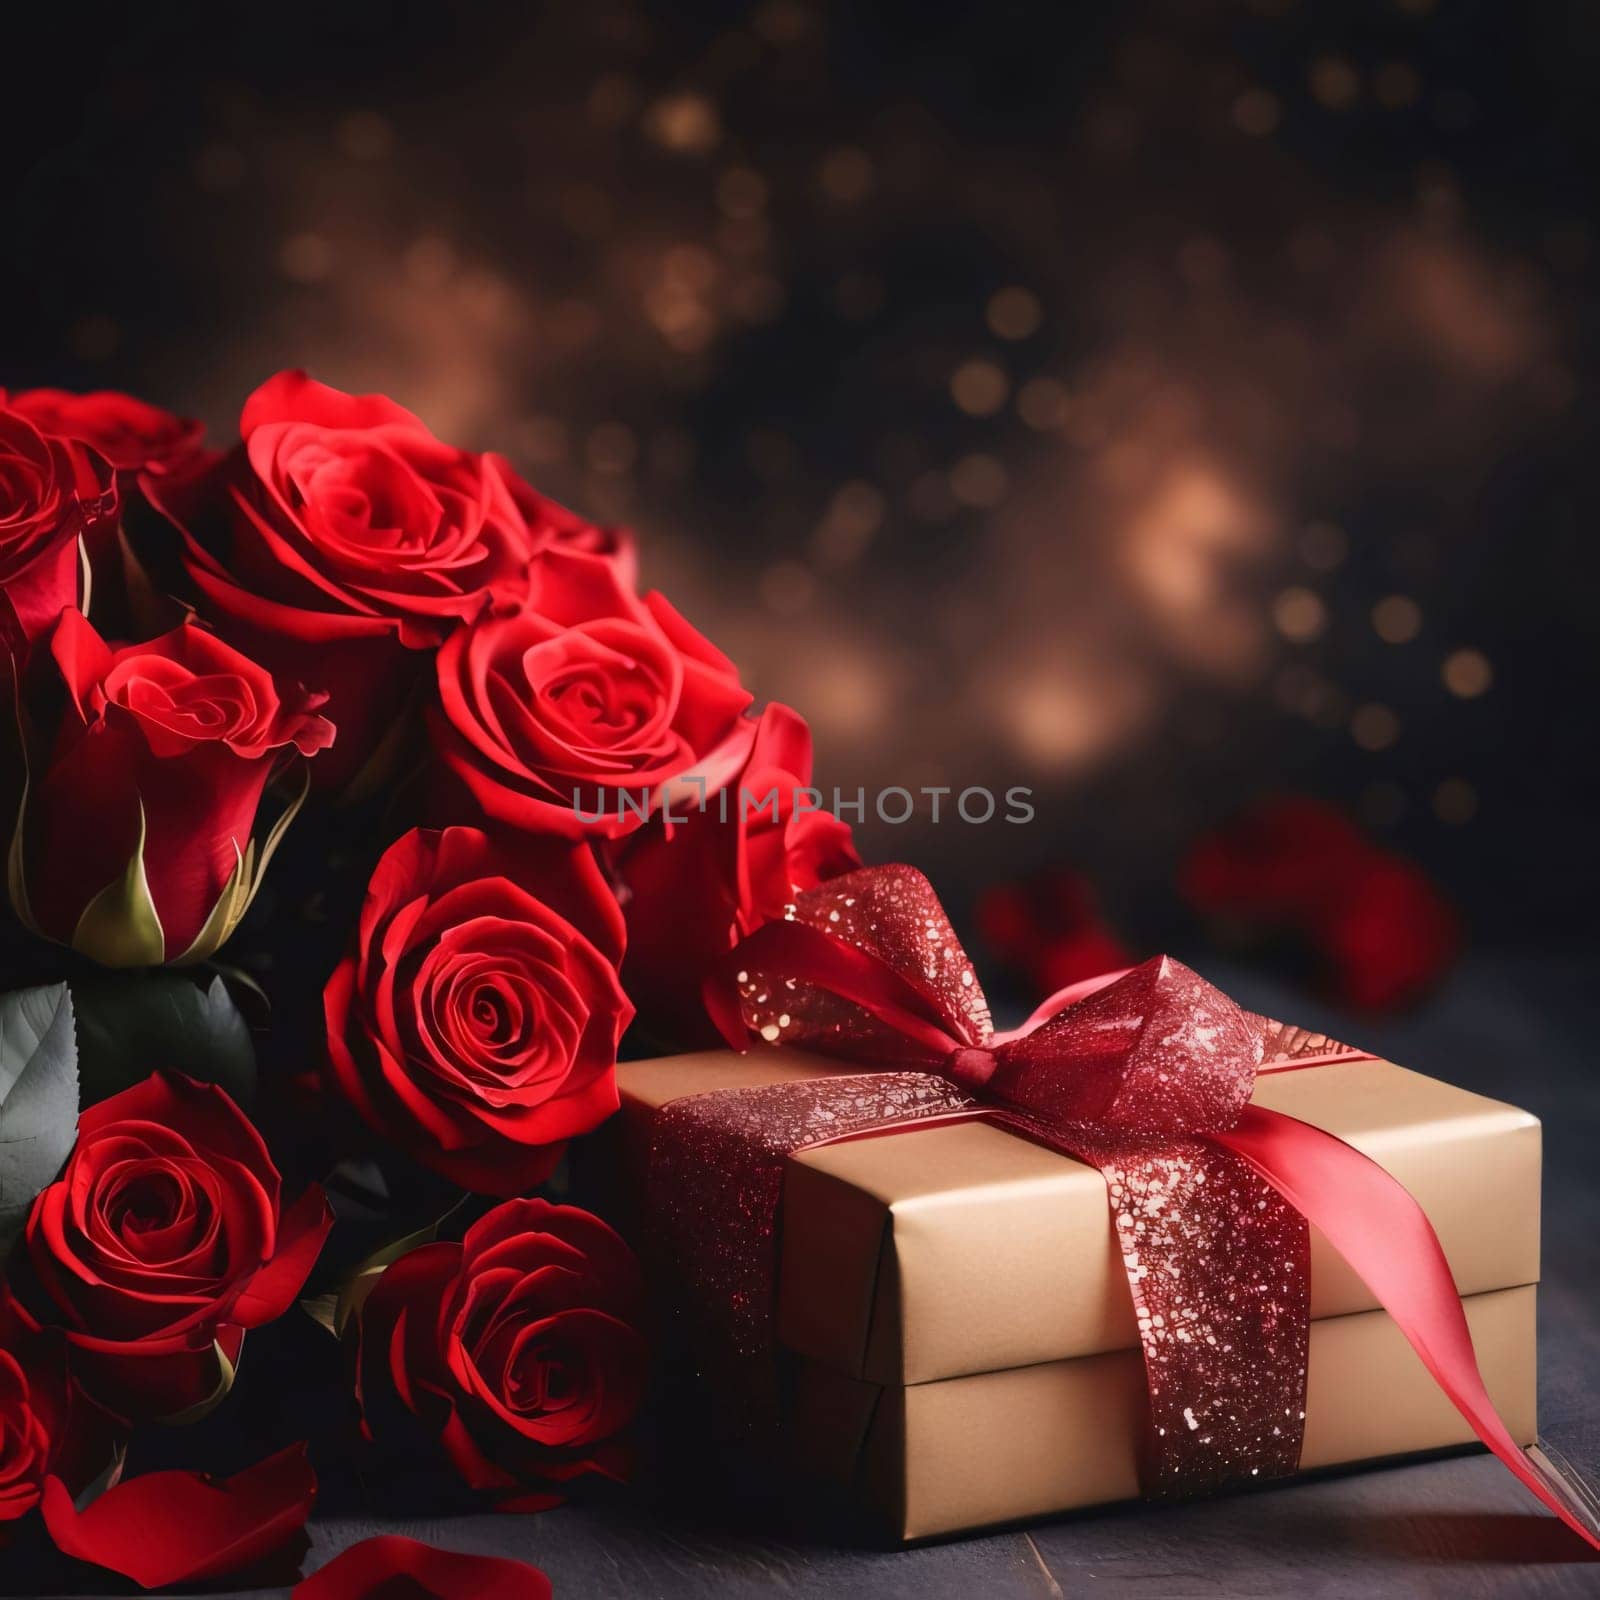 Small gift with red bow and red roses, dark background. Flowering flowers, a symbol of spring, new life. A joyful time of nature waking up to life.